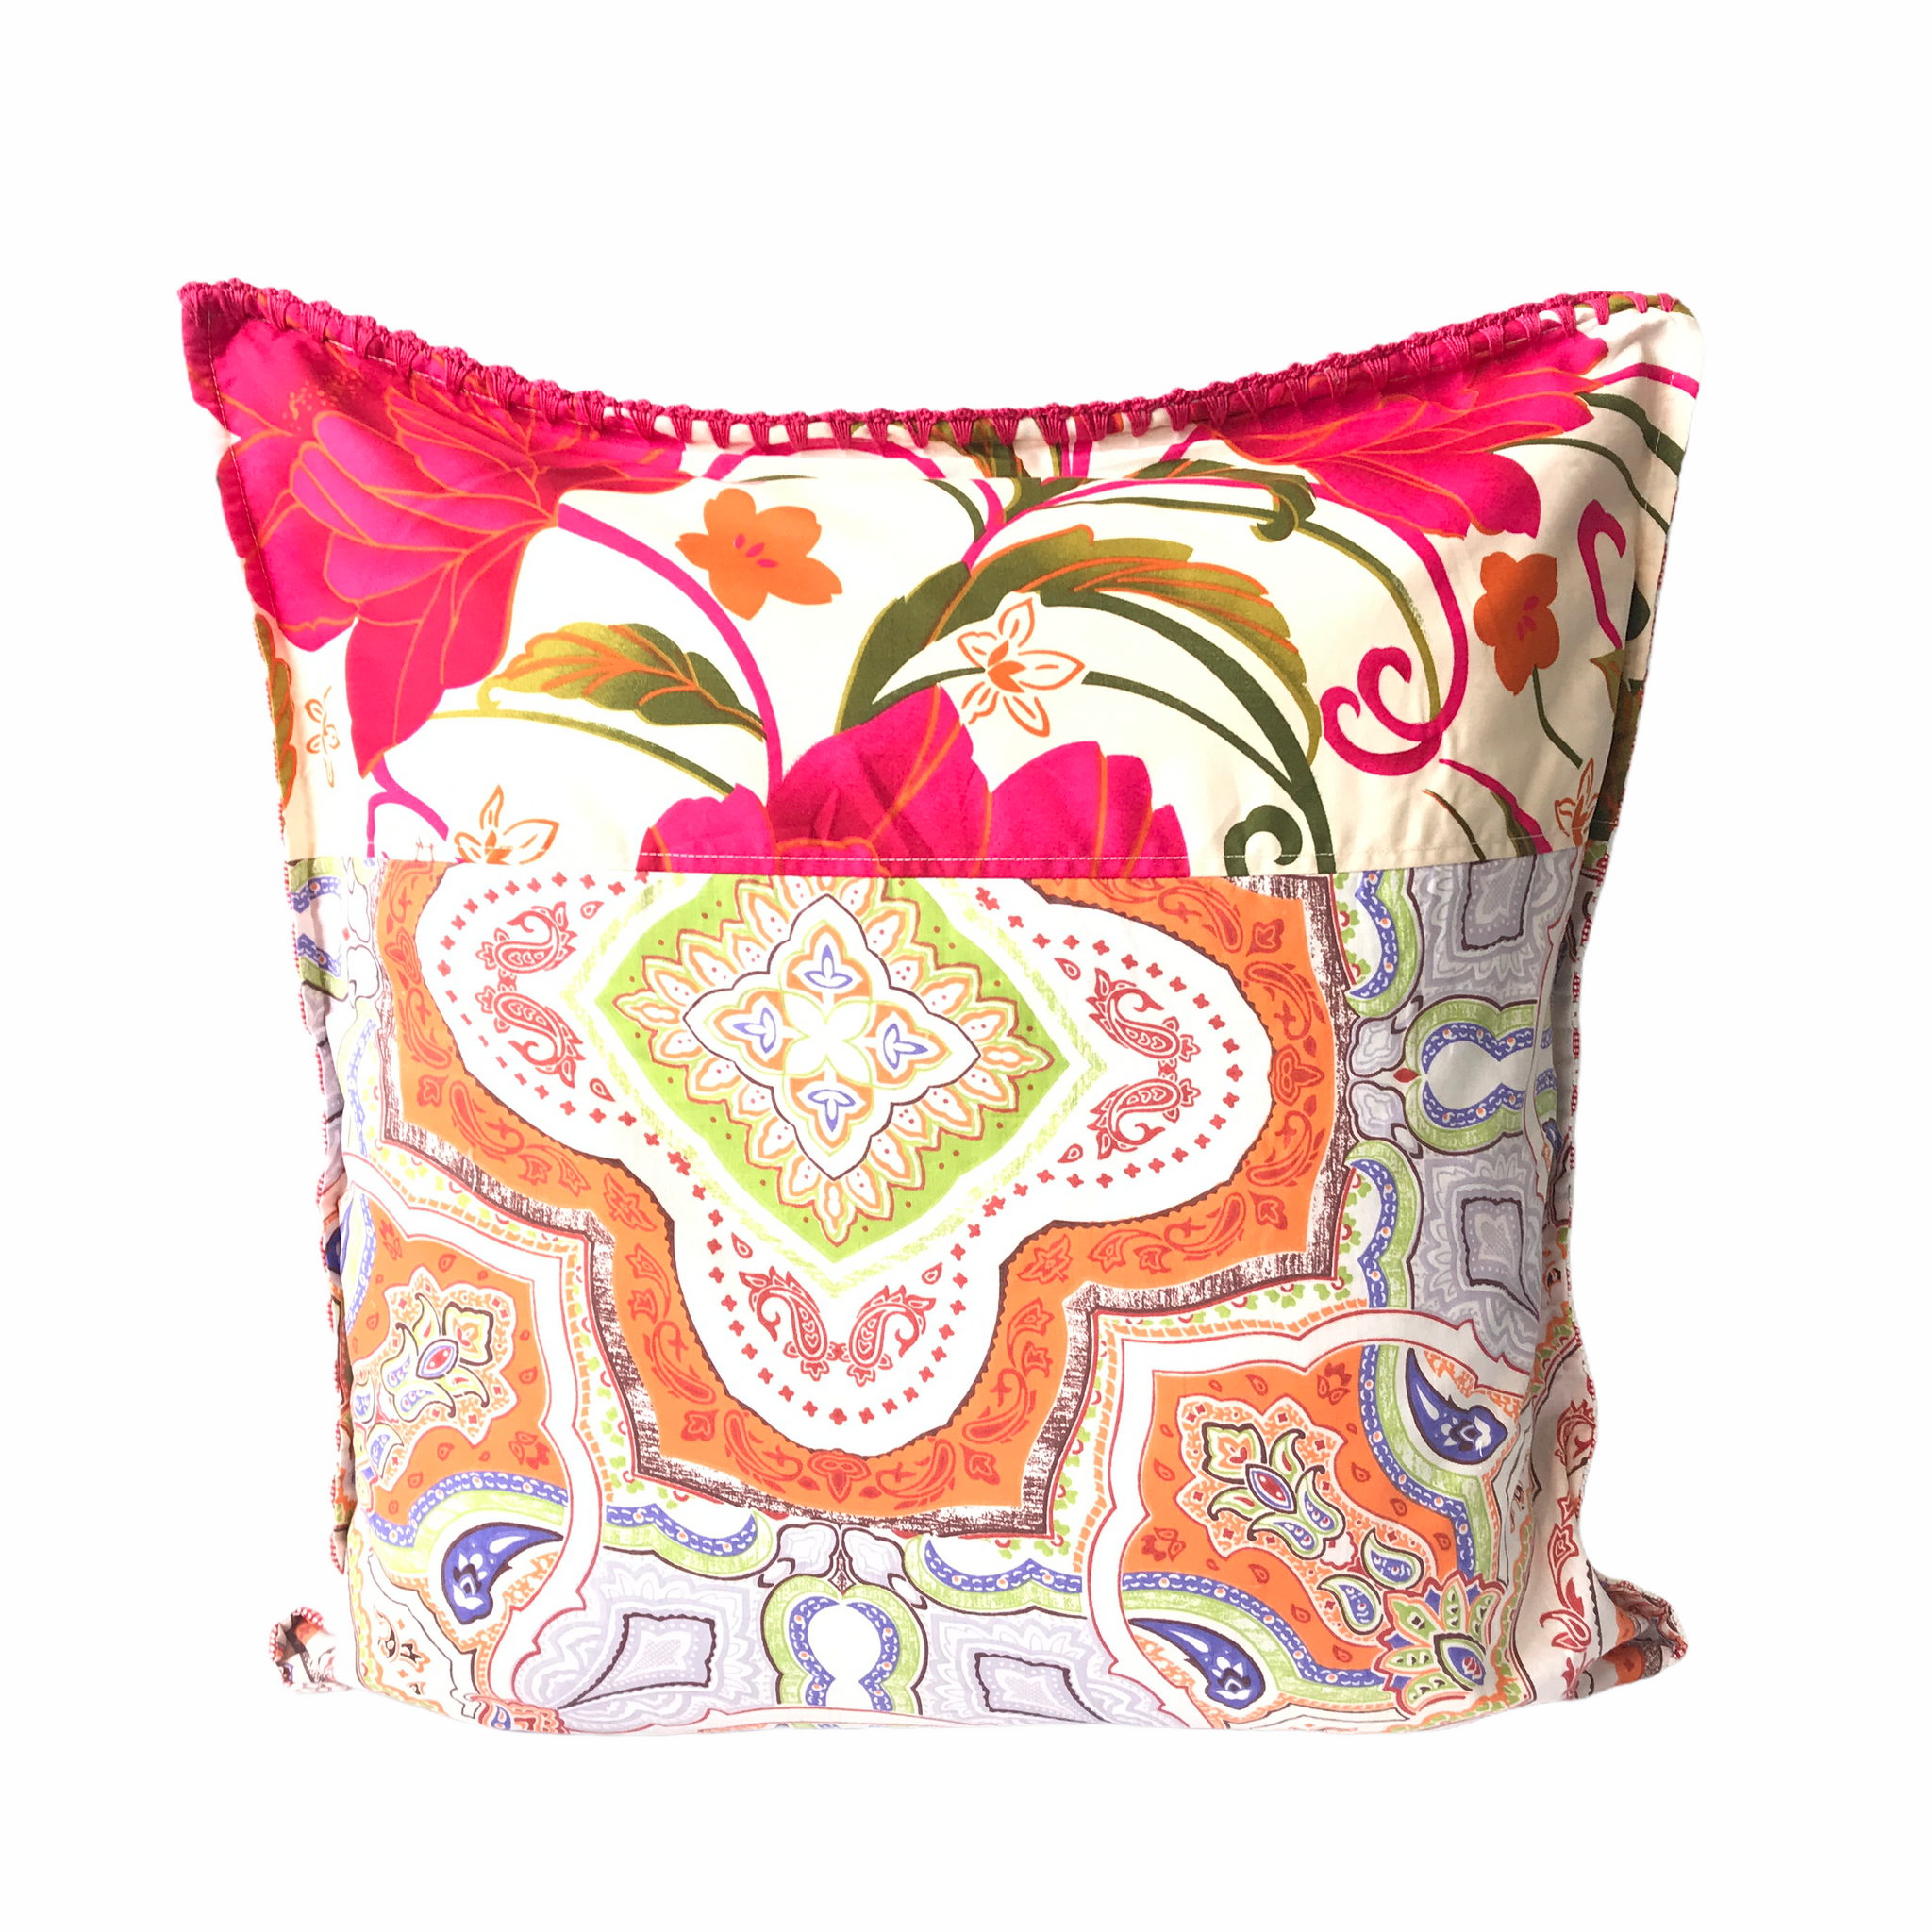 SALE Inabel pillow cover with colourful backing from Philippines